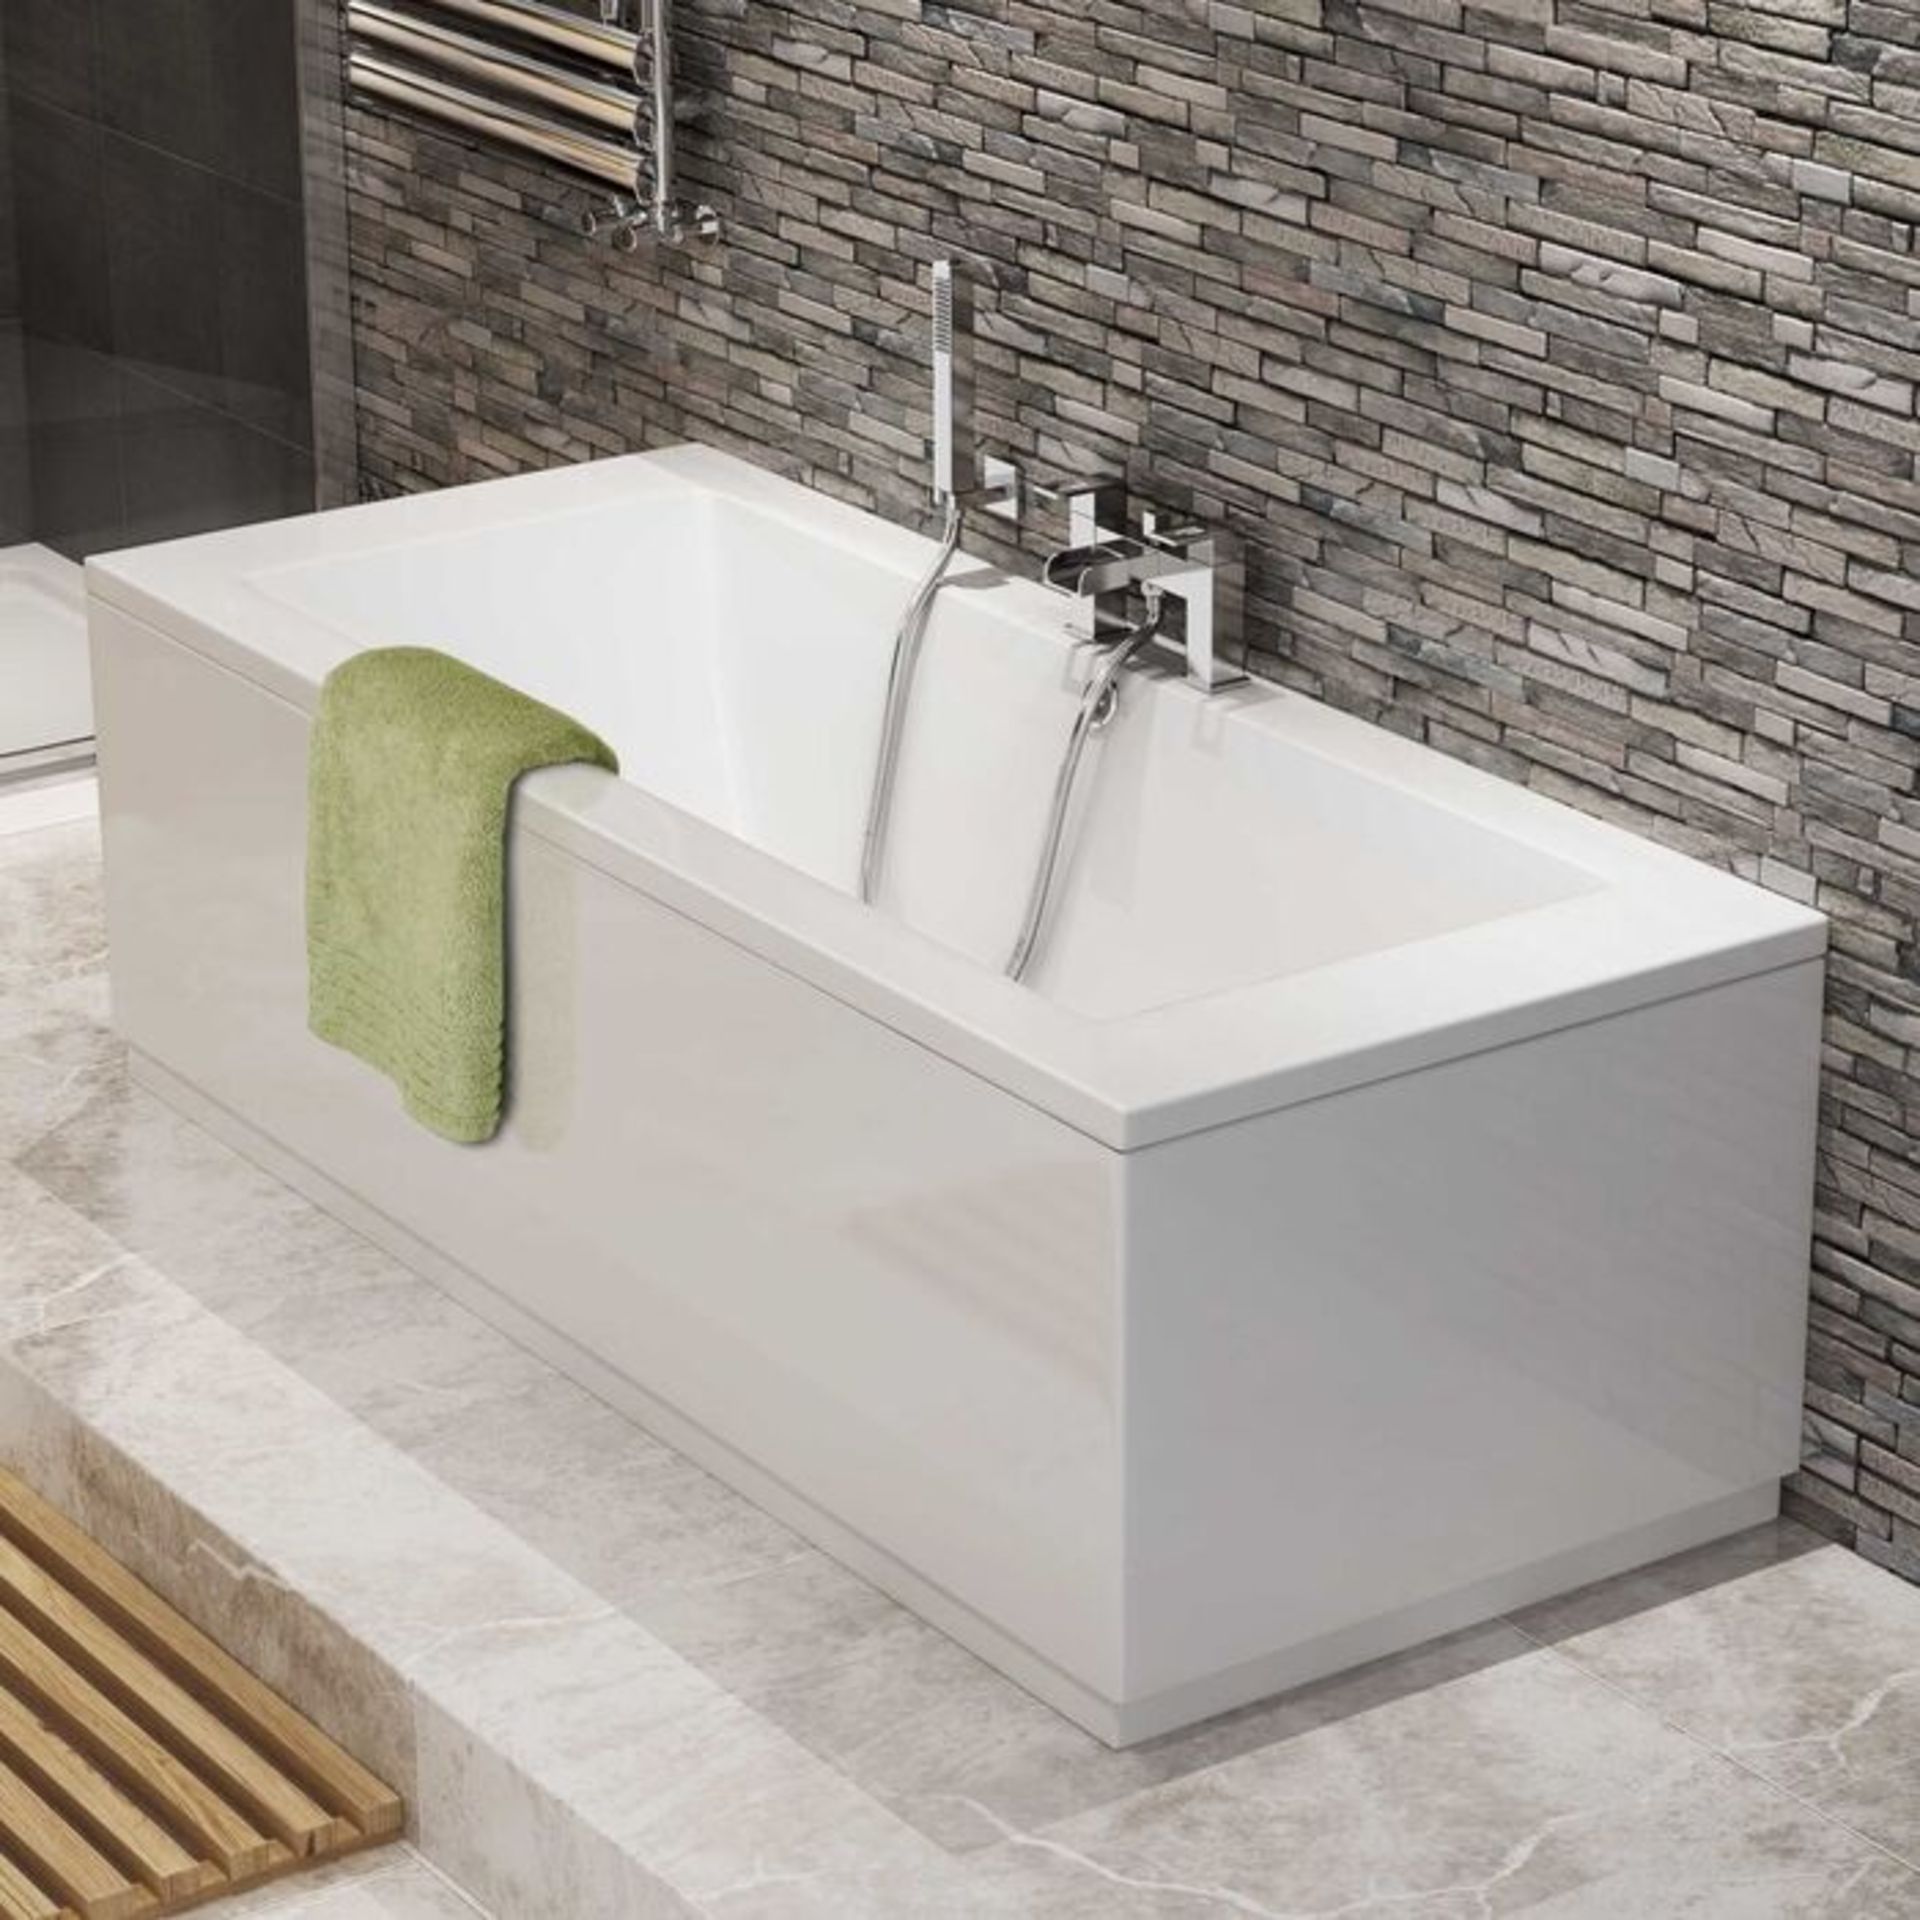 (AA34) 1700 x 750mm Square Double Ended Bath. RRP £349.99. Manufactured in the UK Sanitary g...